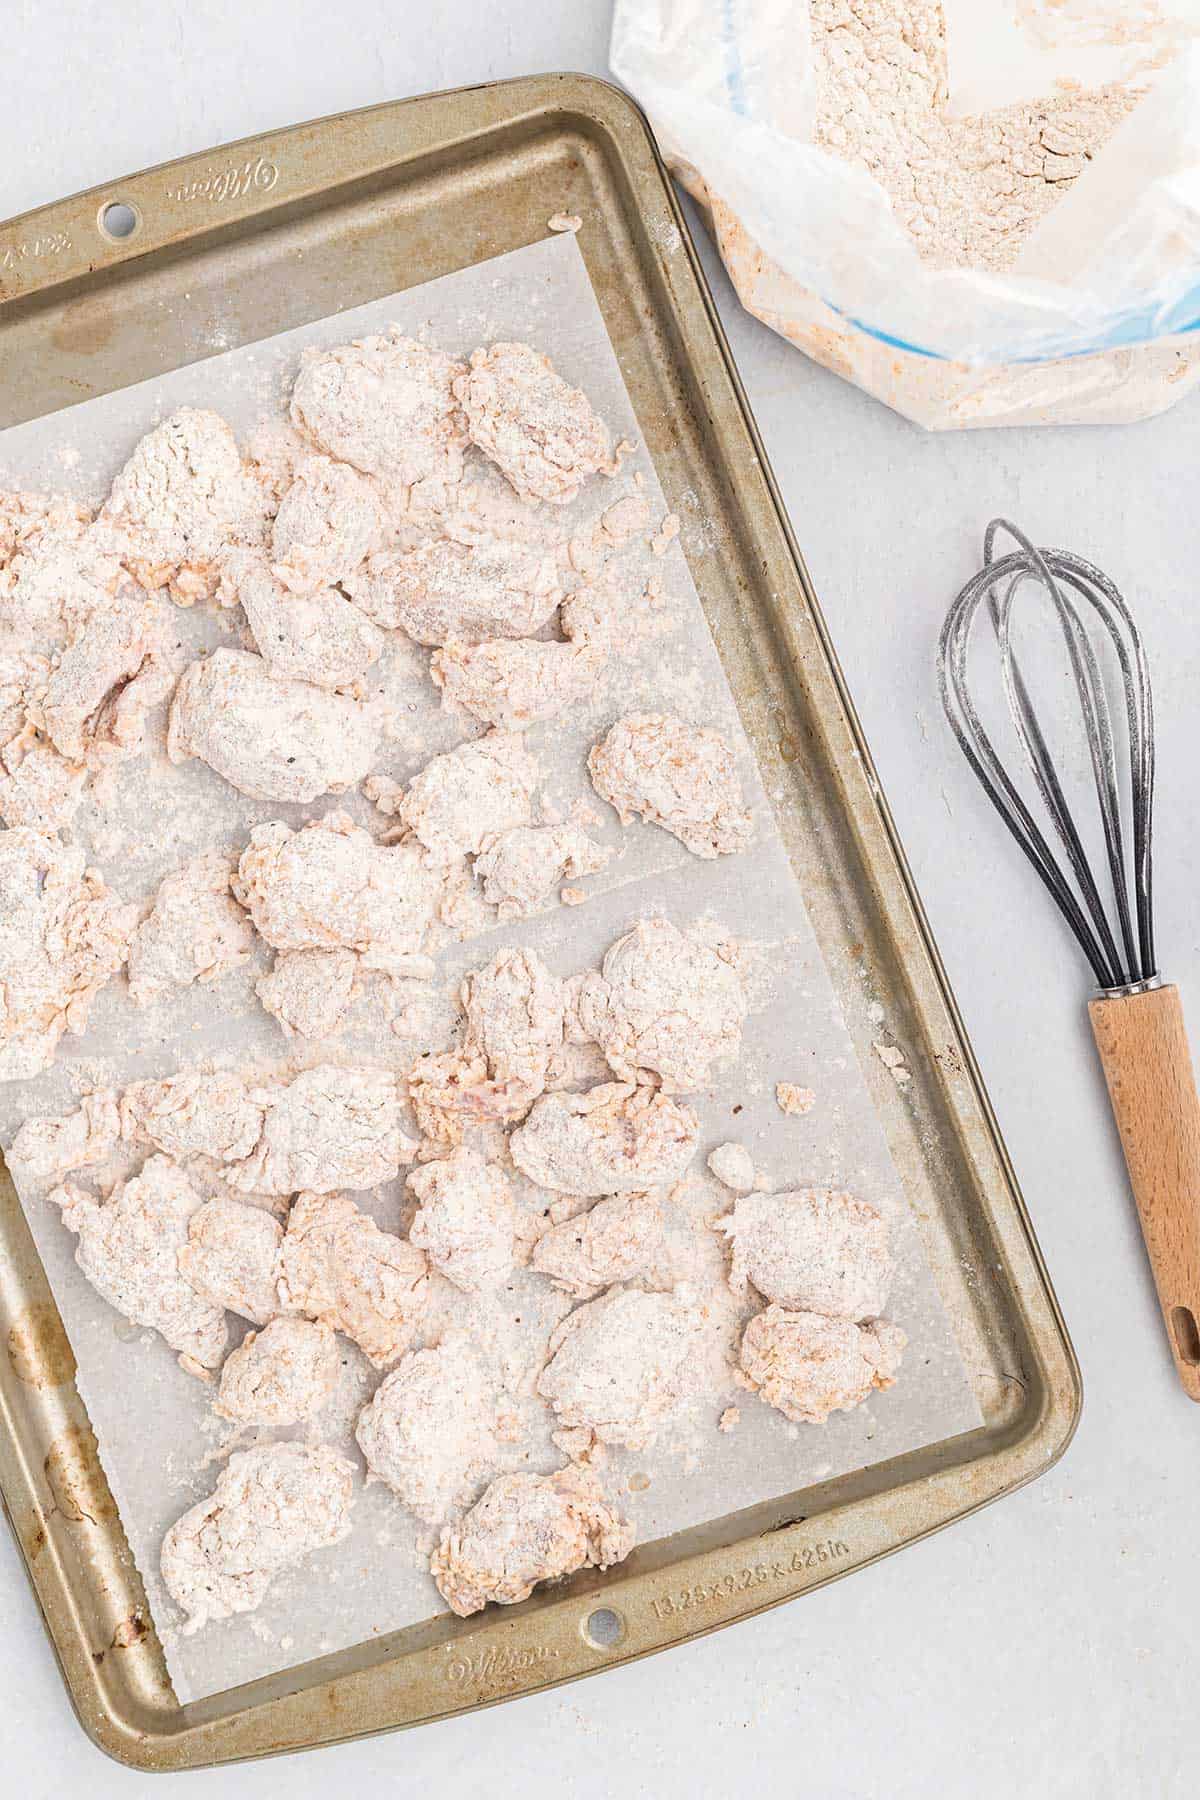 Chicken gizzards coated in flour on a baking tray.